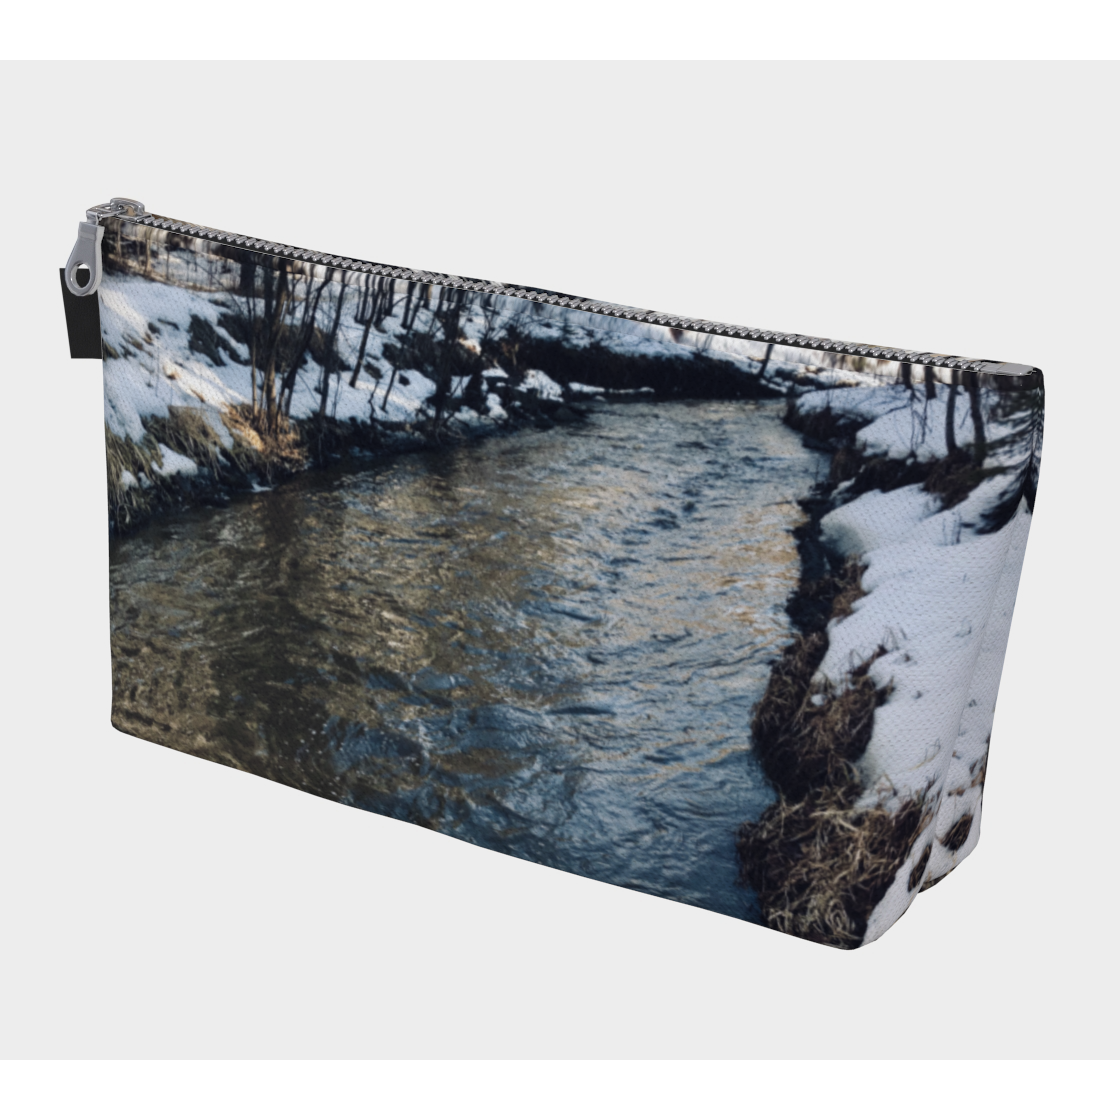 Makeup Zipper Bag, Custom Designed with our River Running Picture, Front